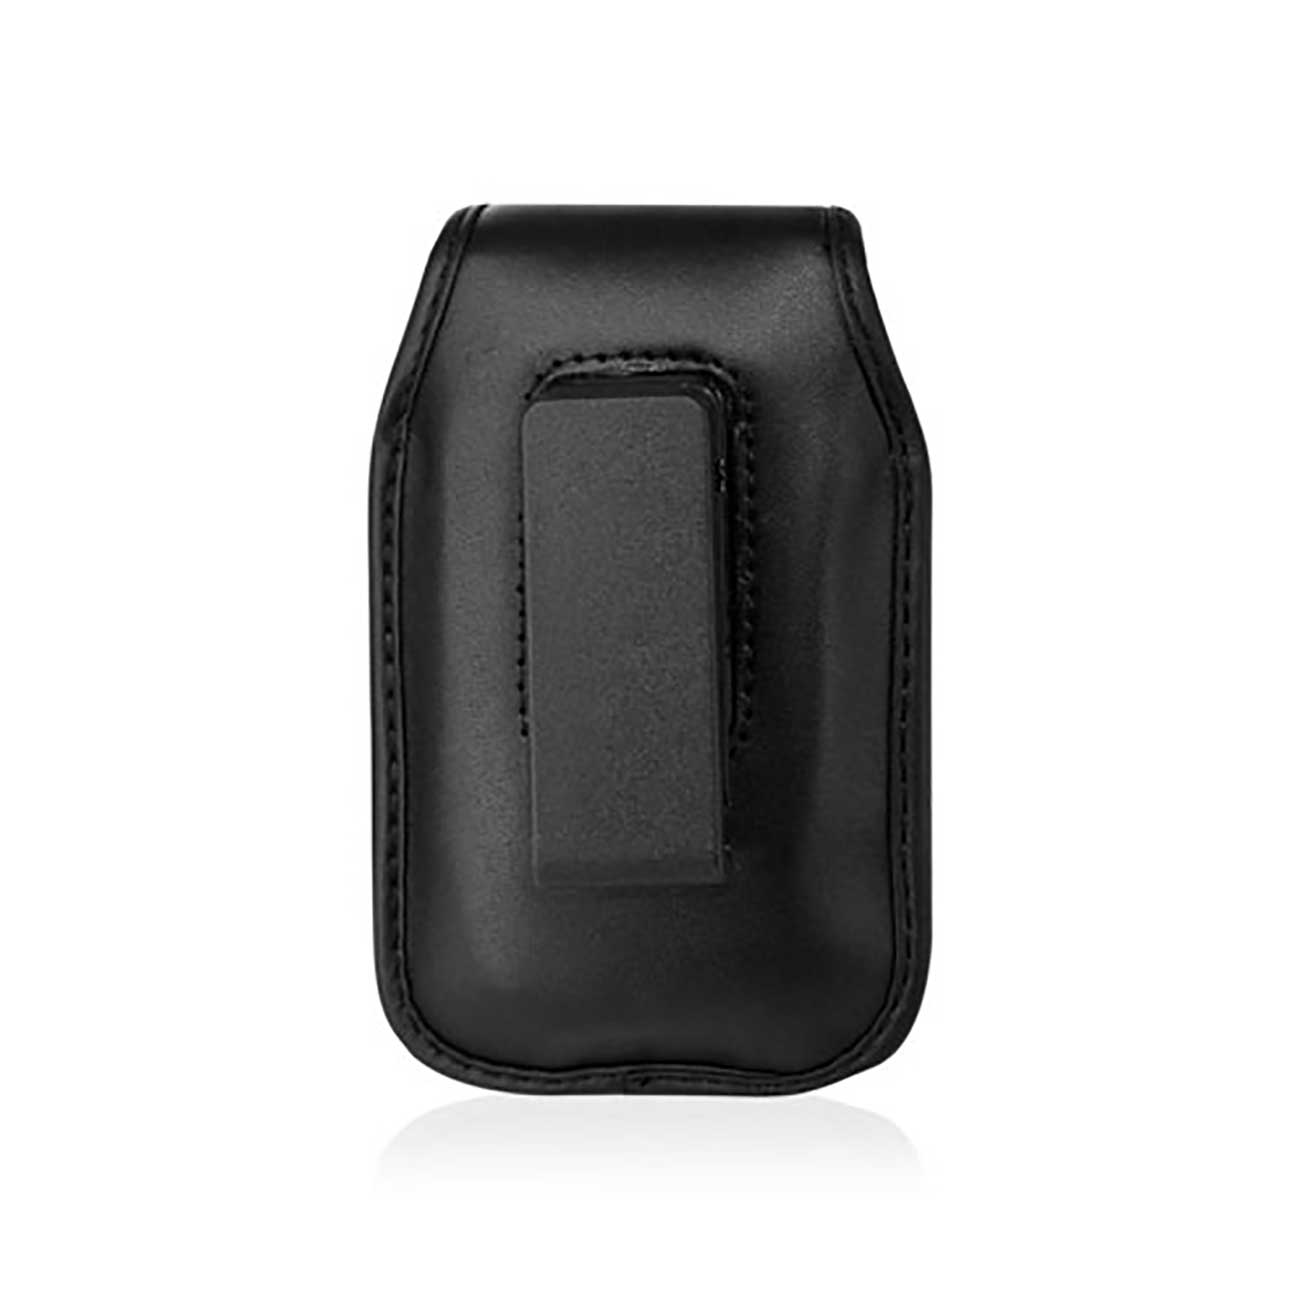 Pouch/ Phone Holster Vertical Vp11A LG Rumor LX260 4.3X2X0.7 Inches Black Color